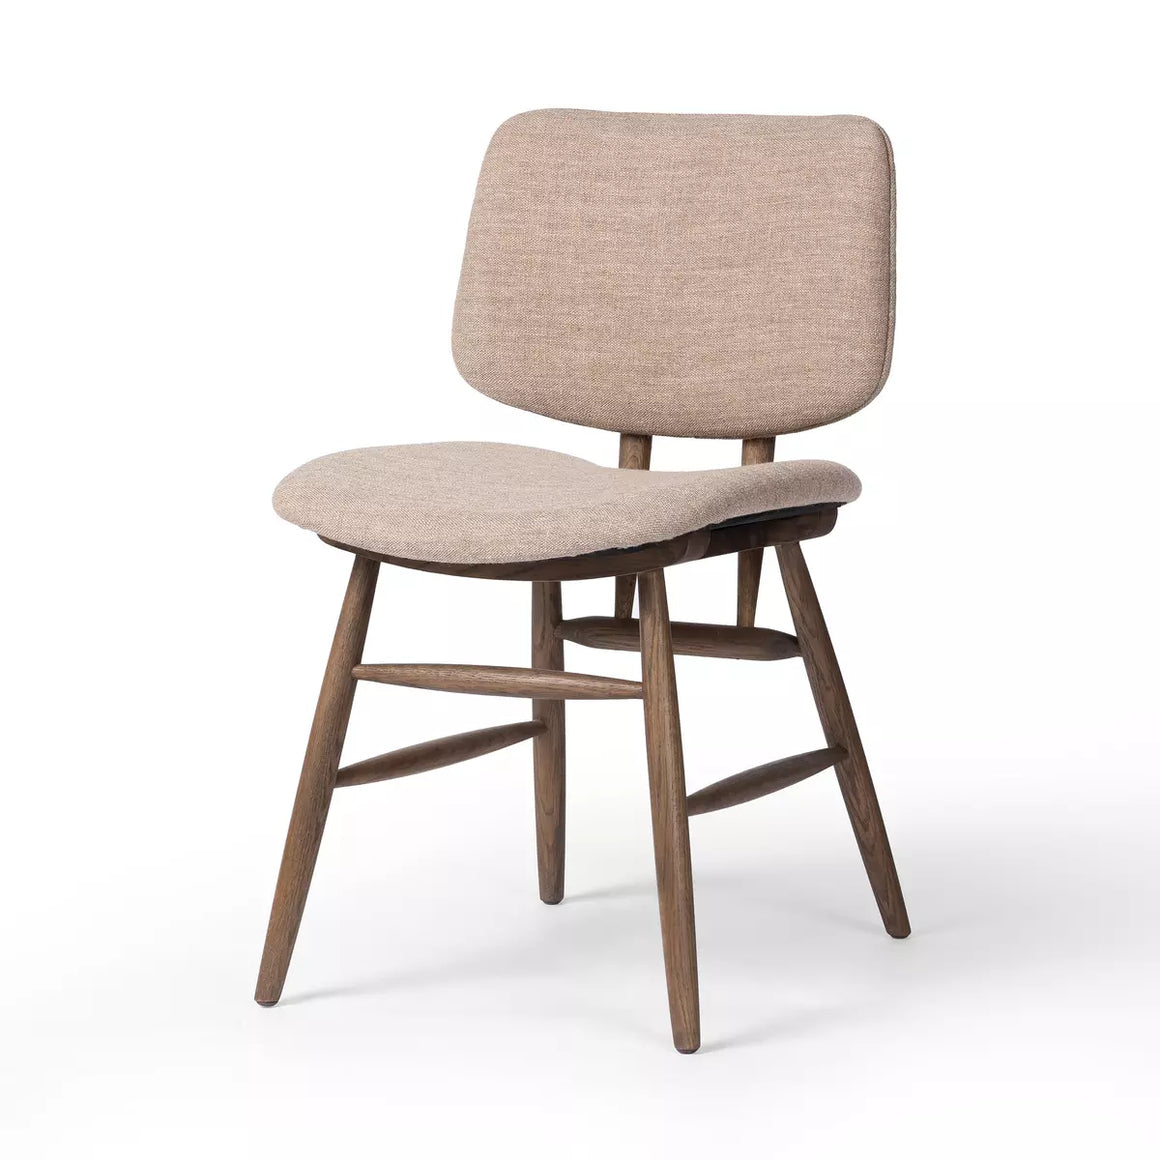 Montague Dining Chair - Alcala Fawn